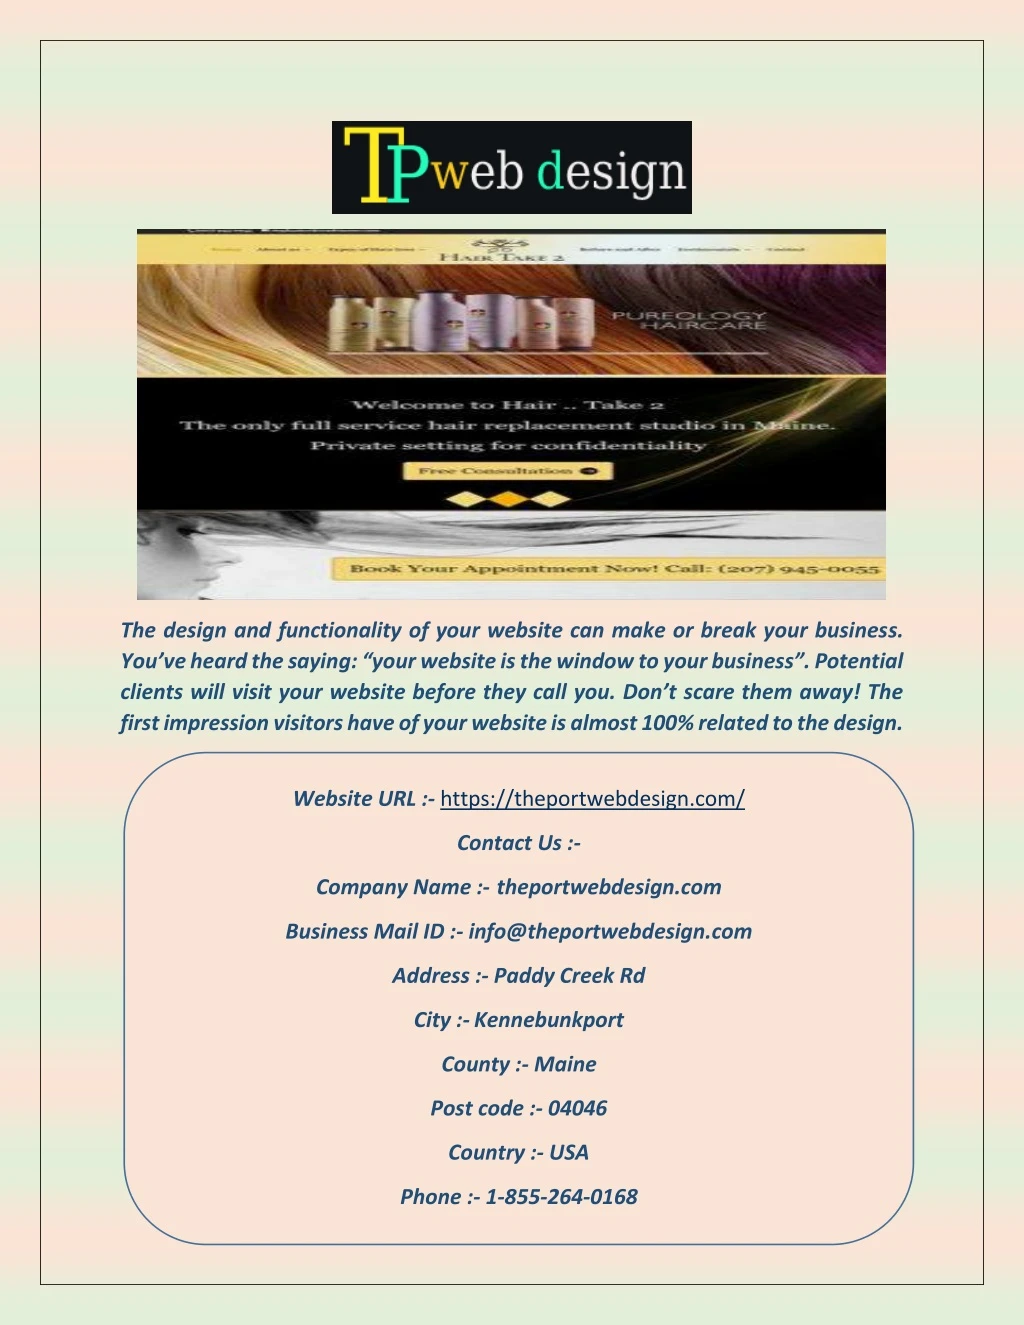 the design and functionality of your website